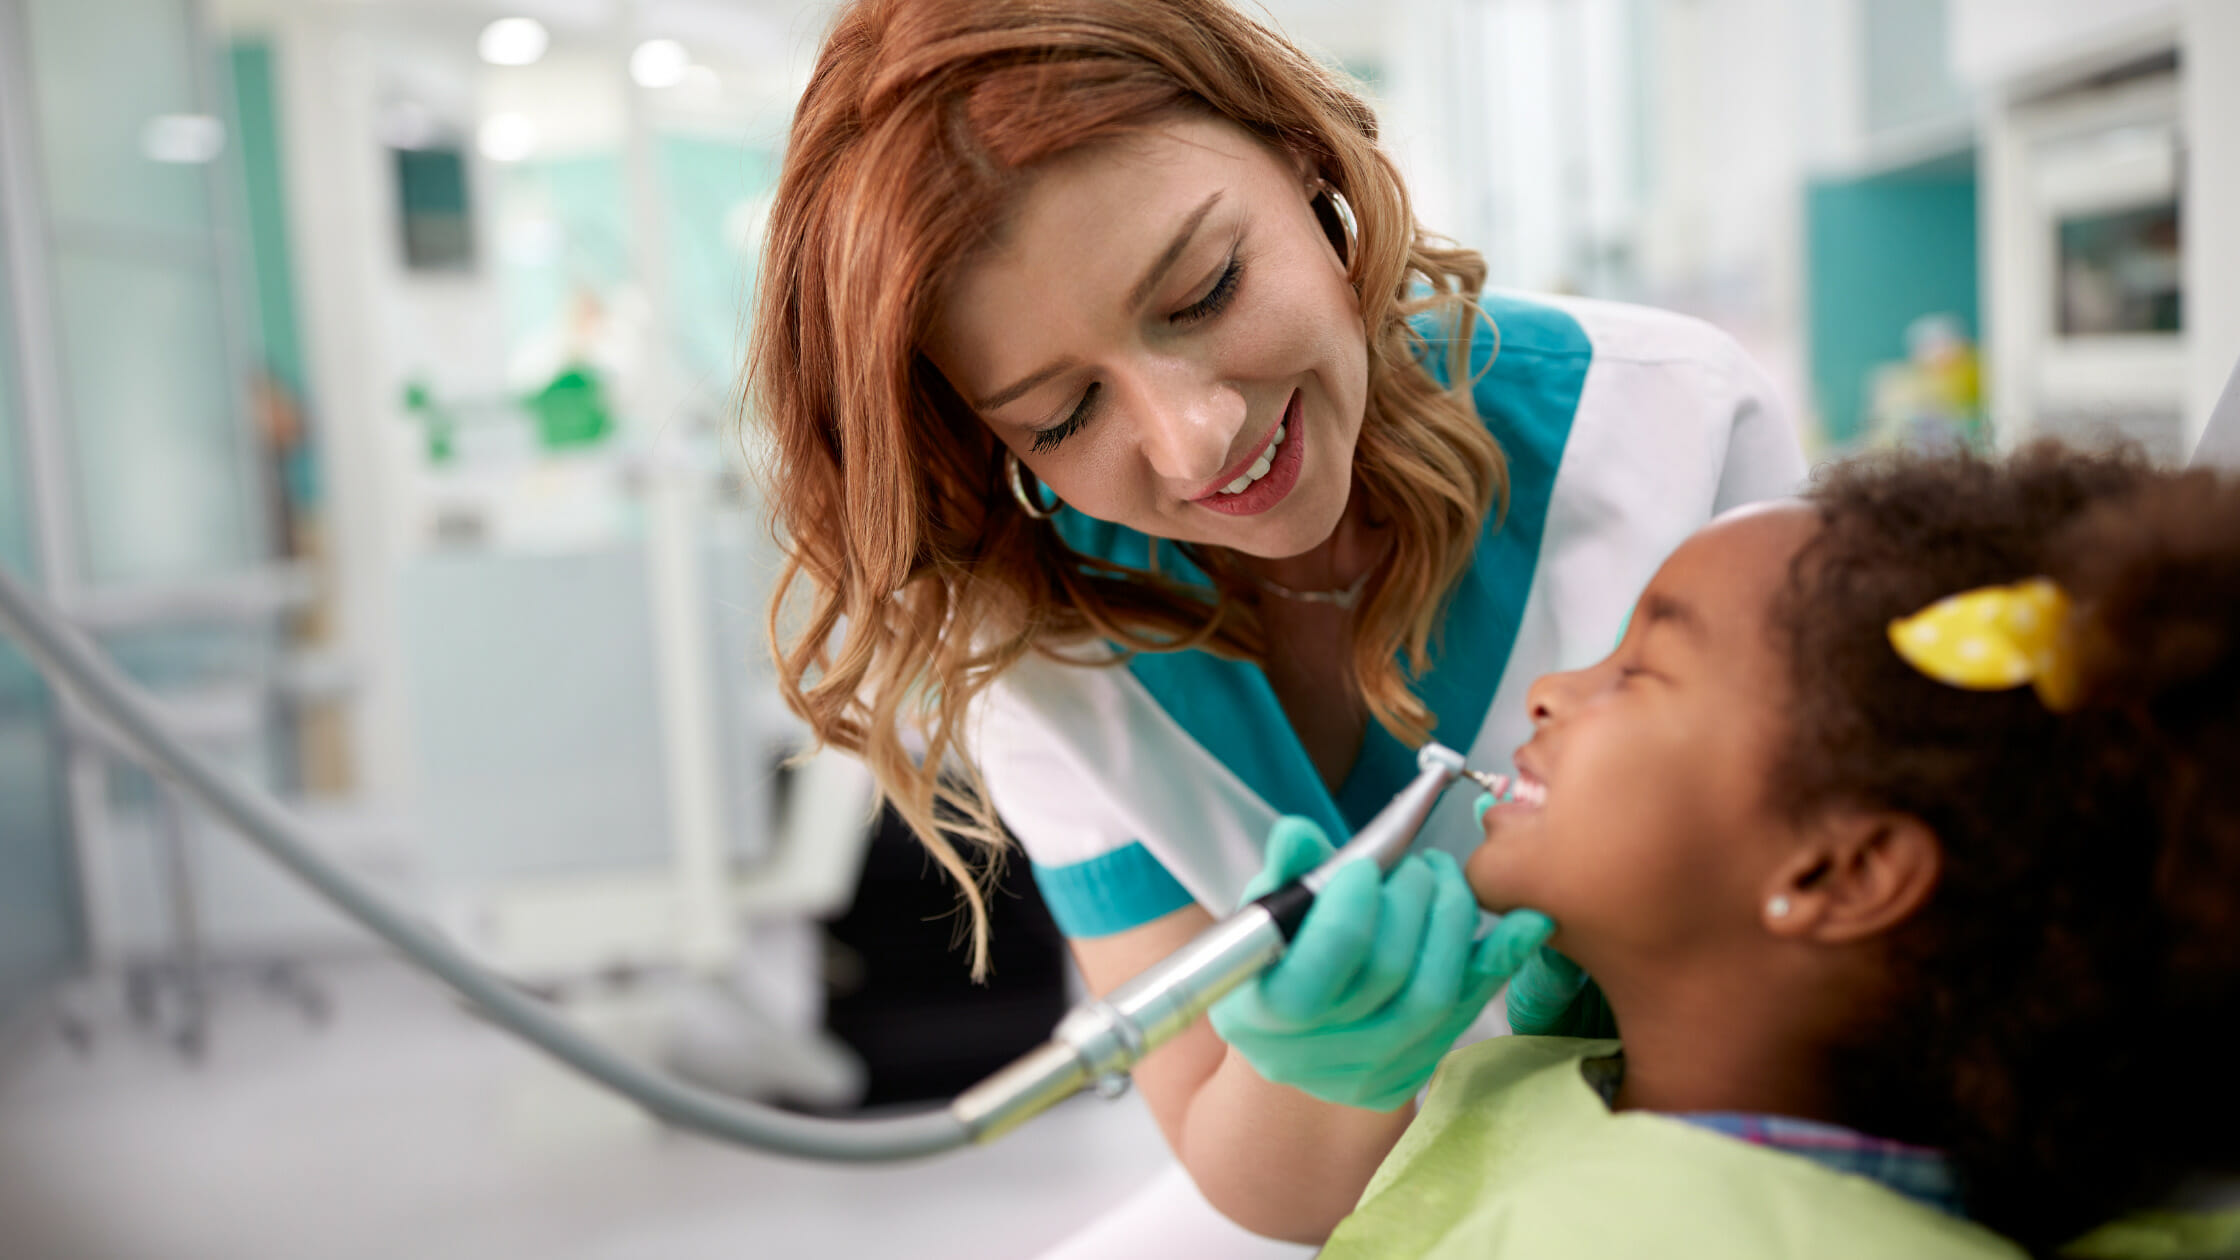 Dental assistant cleaning a child's teeth